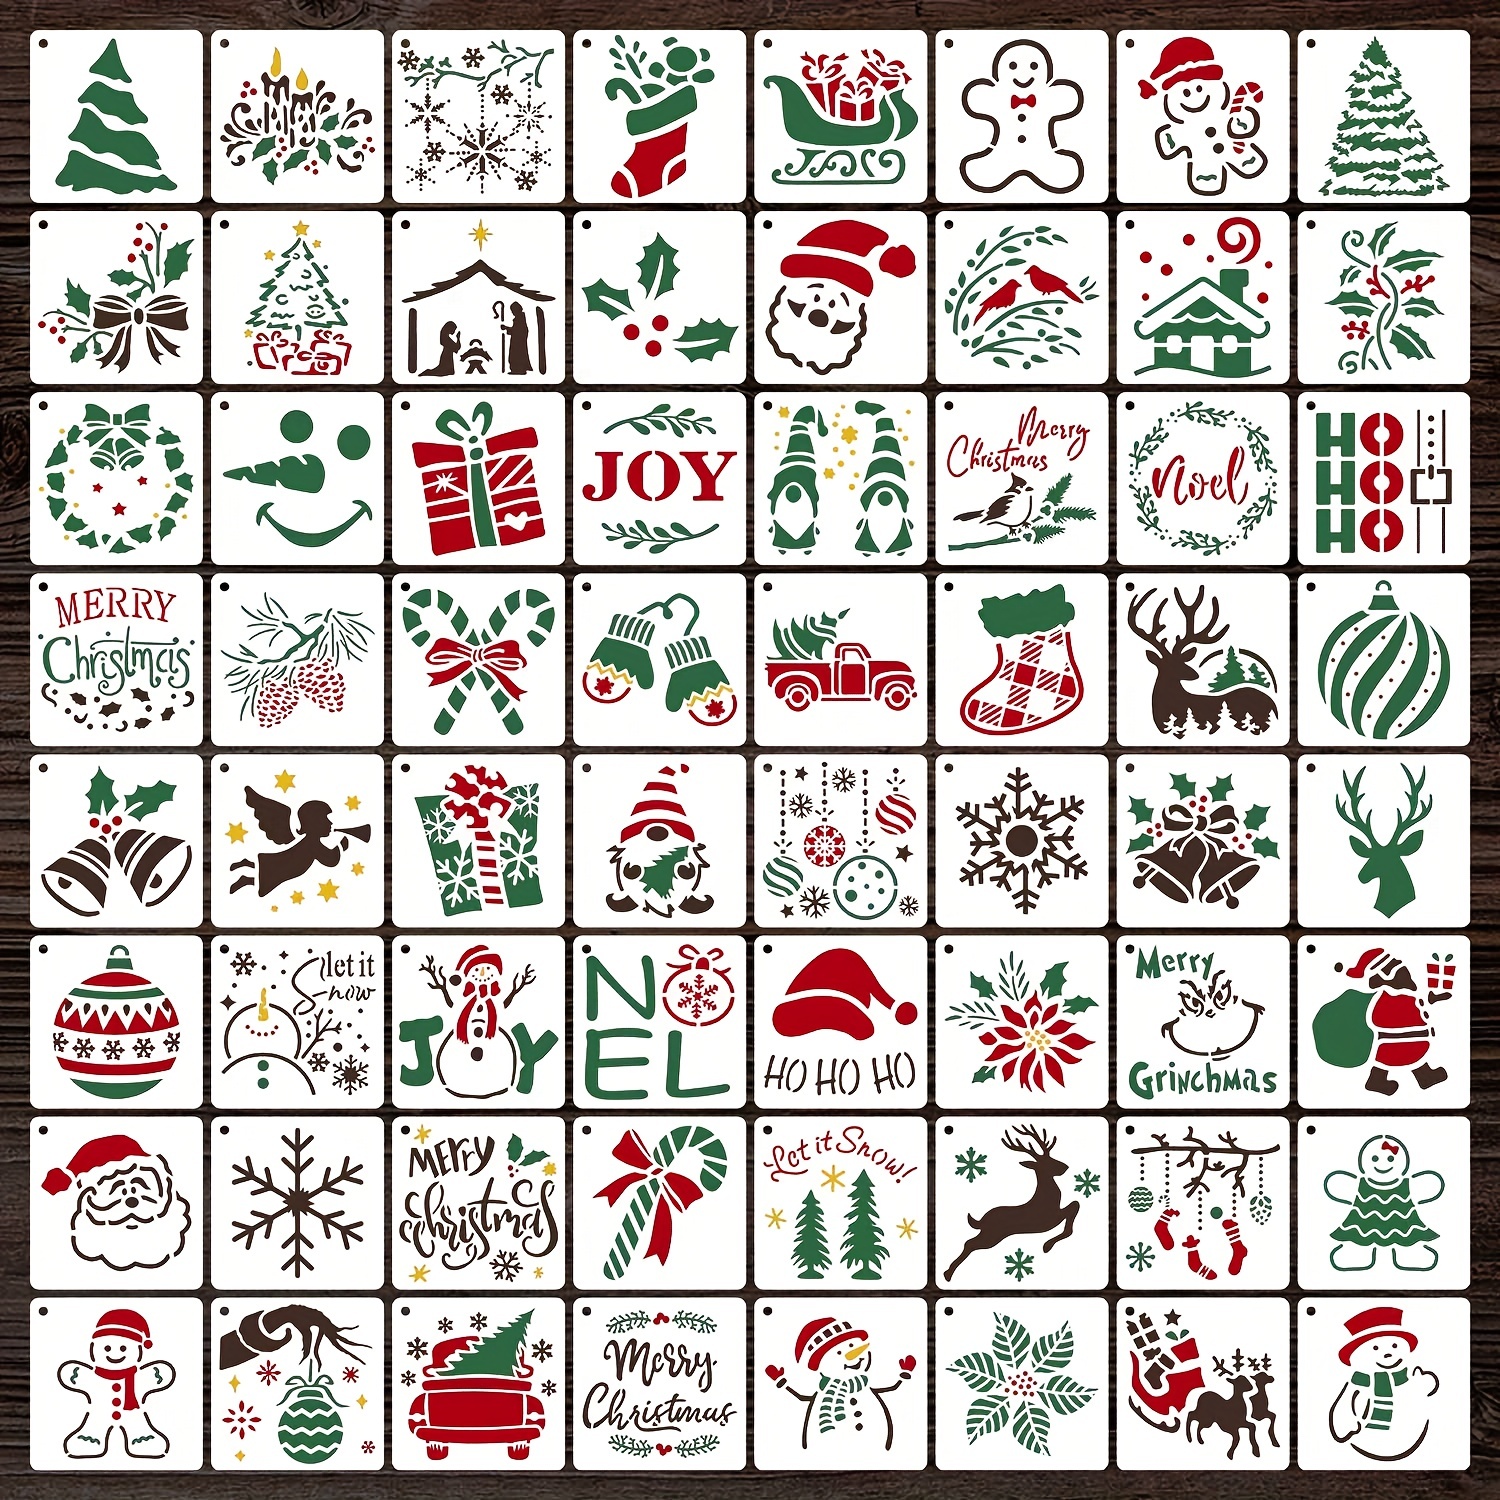 60 Pcs Christmas Stencils for Painting on Wood 3x3 Inch Small